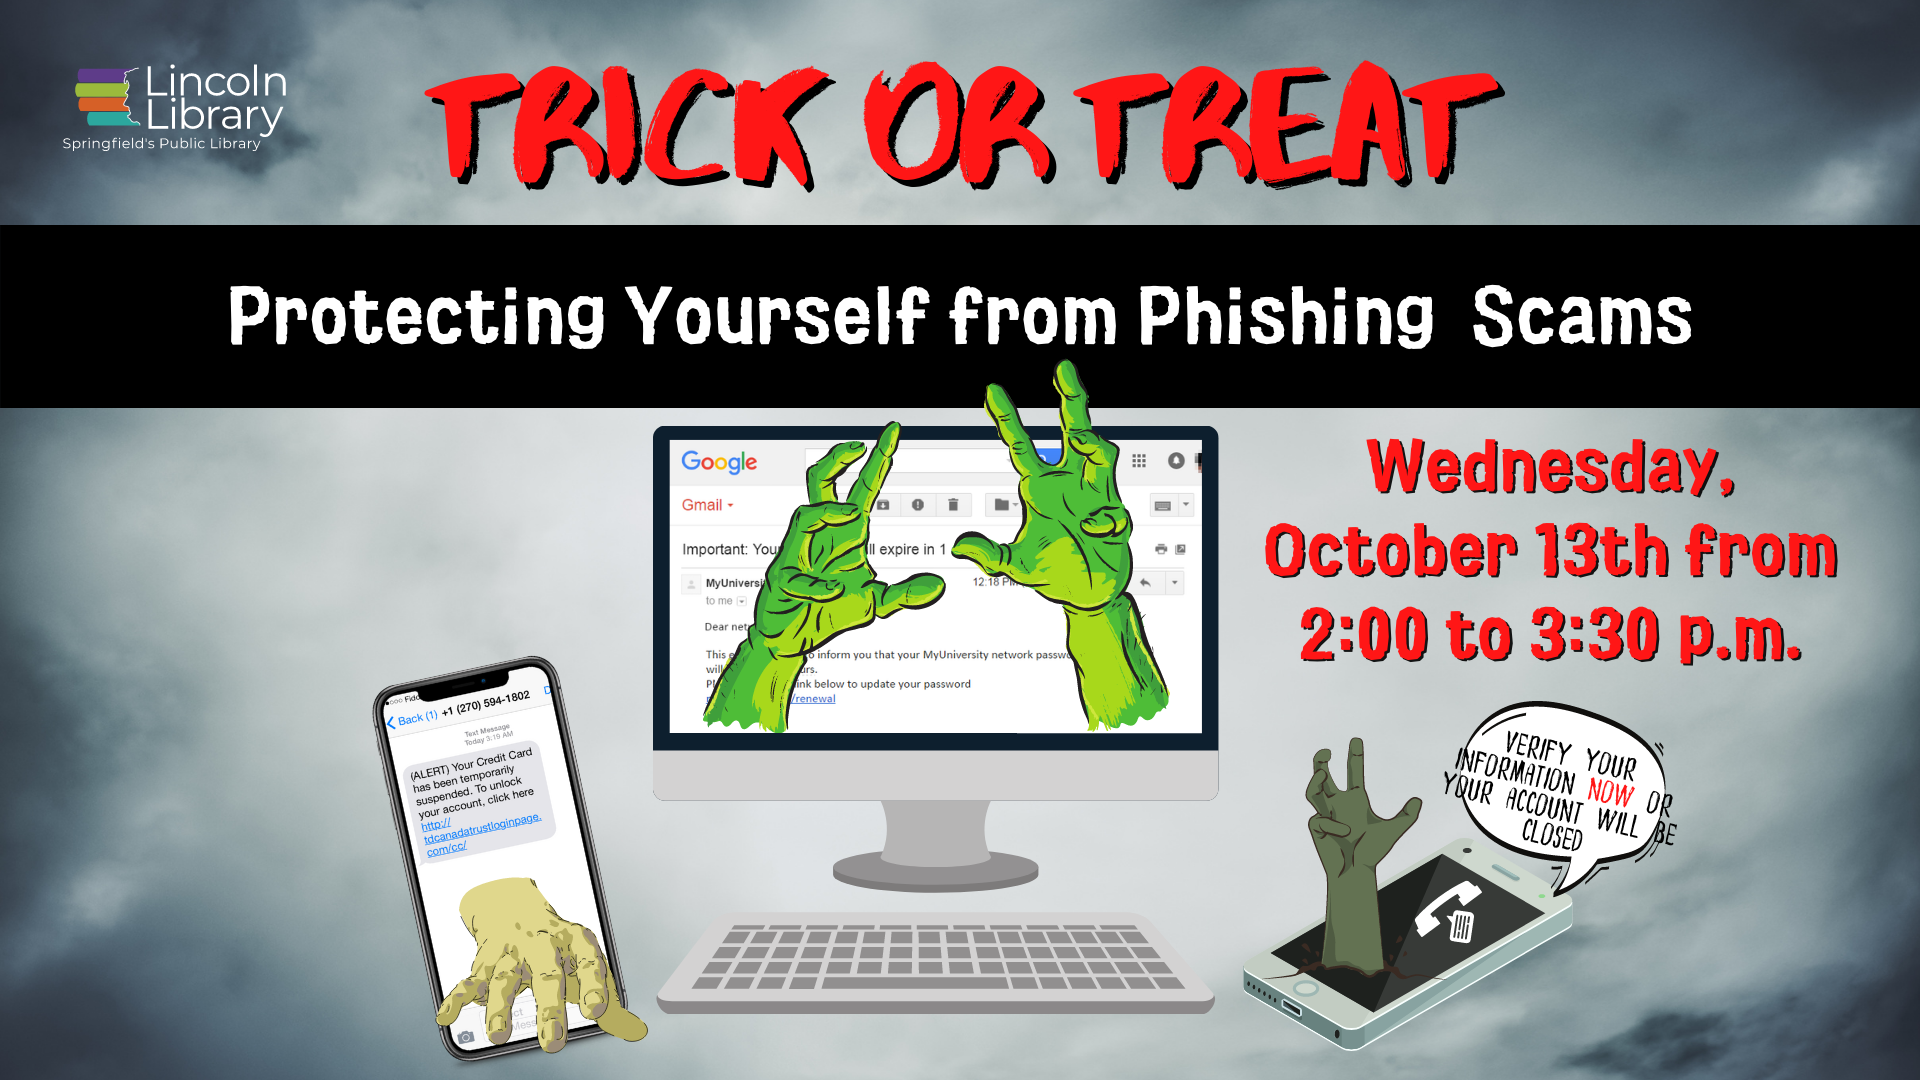 Advertisement for program "Trick or Treat: Protecting Yourself from Phishing Scams" to be held on Wednesday, October 13th from 2:00 to 3:30 p.m.